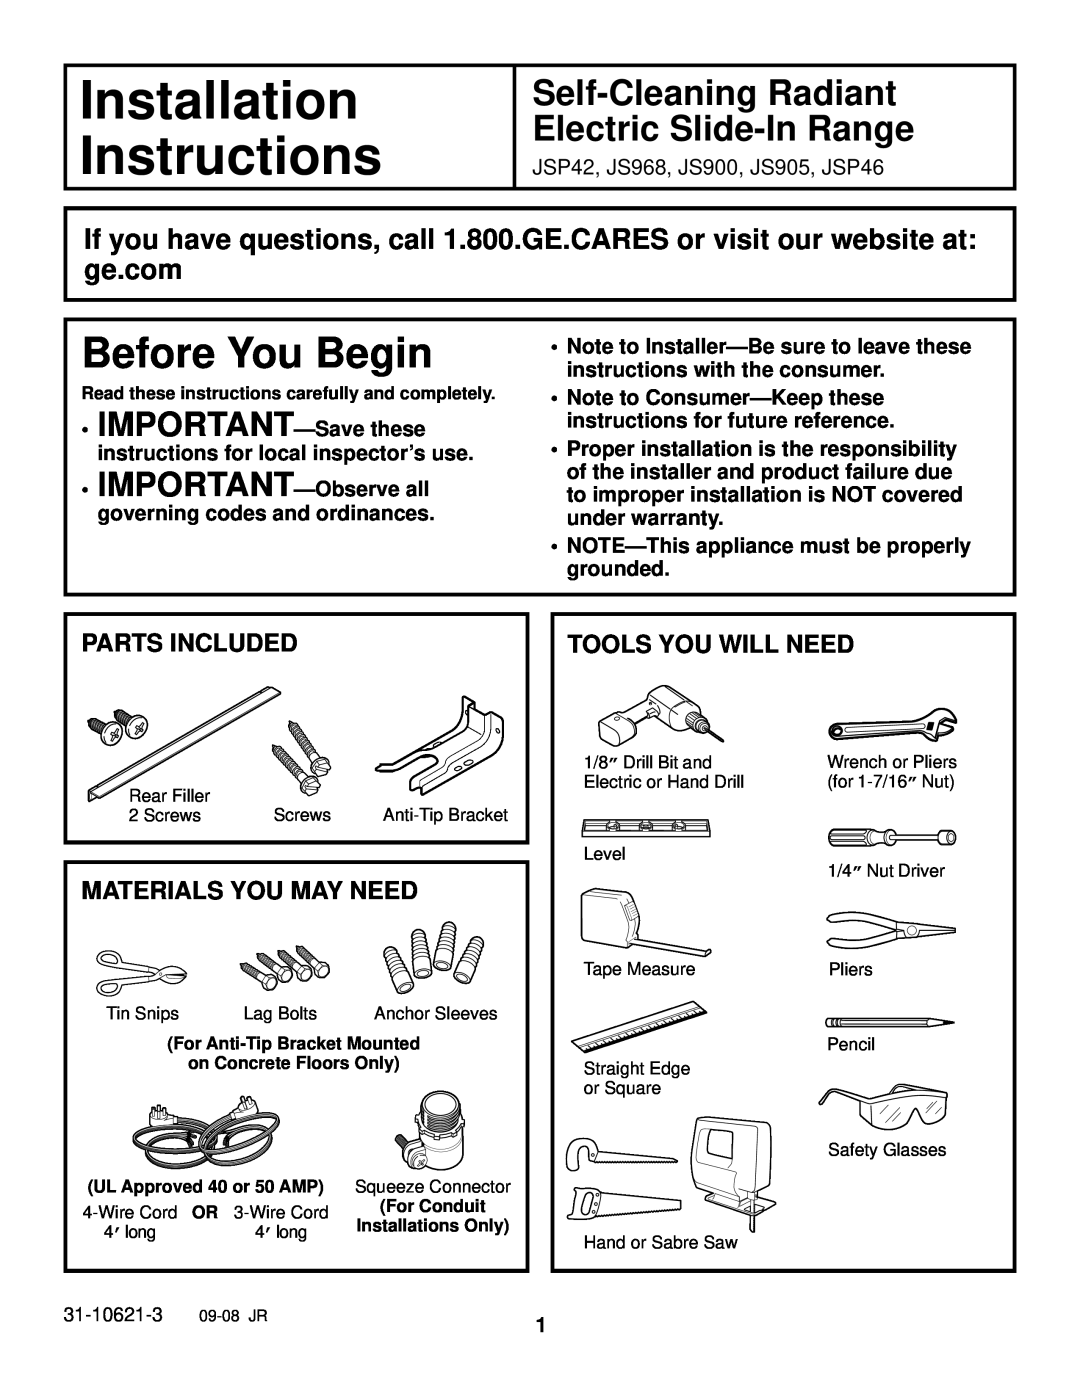 GE JS905 installation instructions Installation, Instructions, Before You Begin, Parts Included, Materials You May Need 